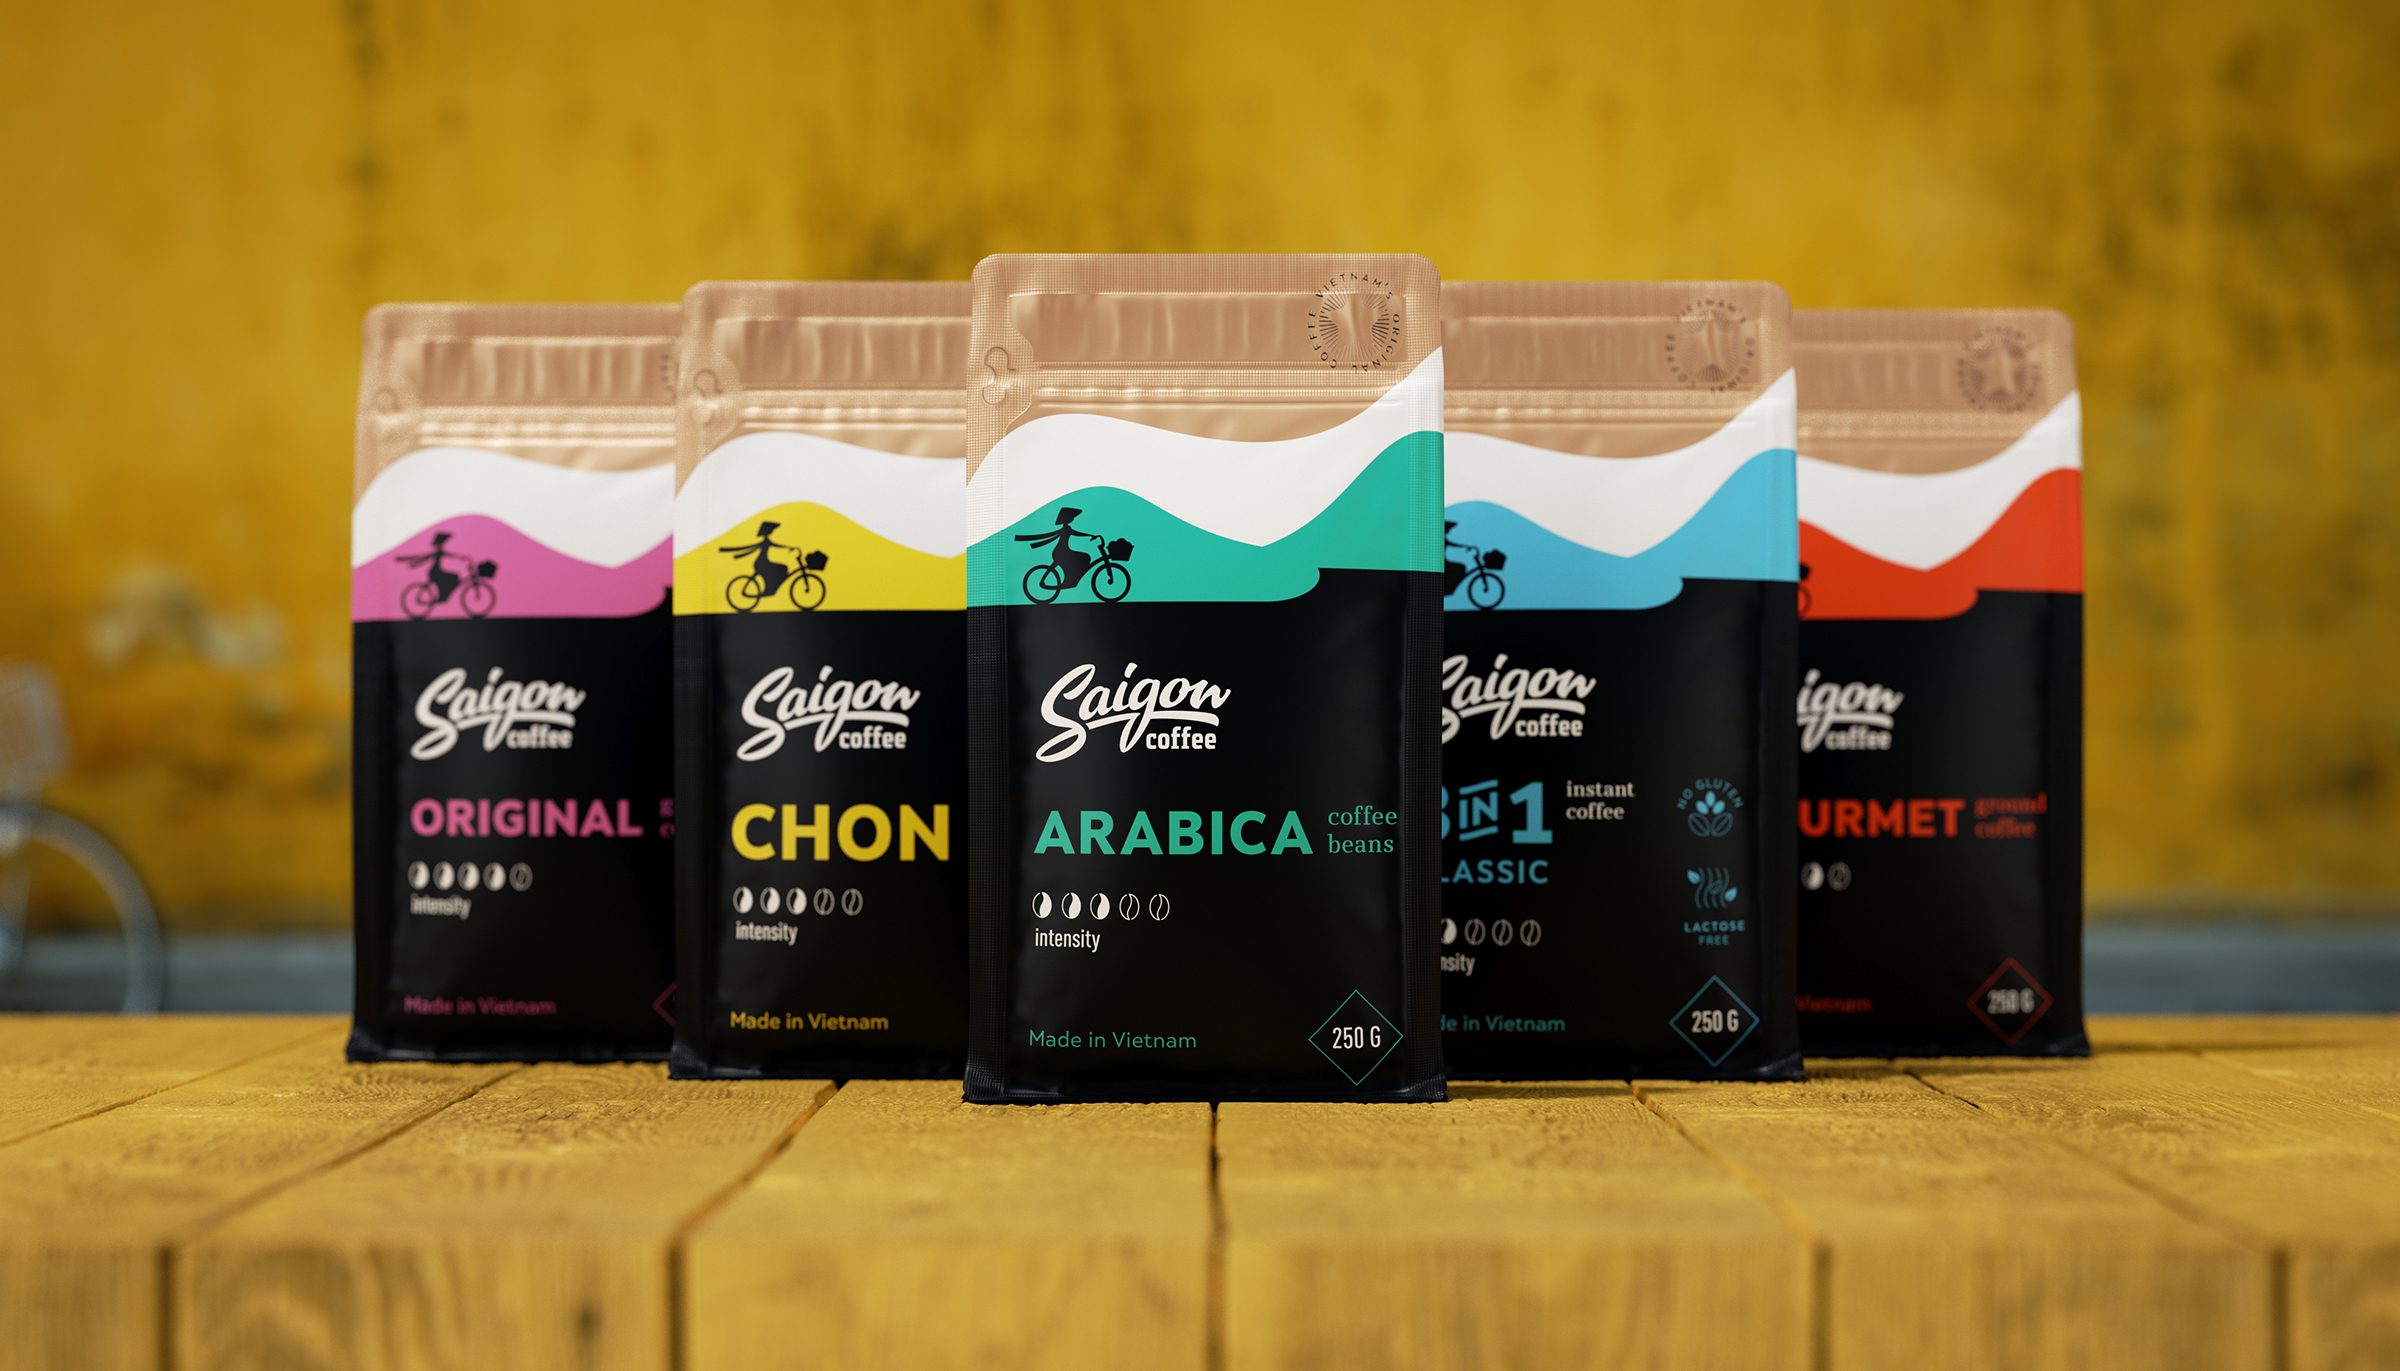 The Packaging Design of the Brand of Vietnamese Coffee